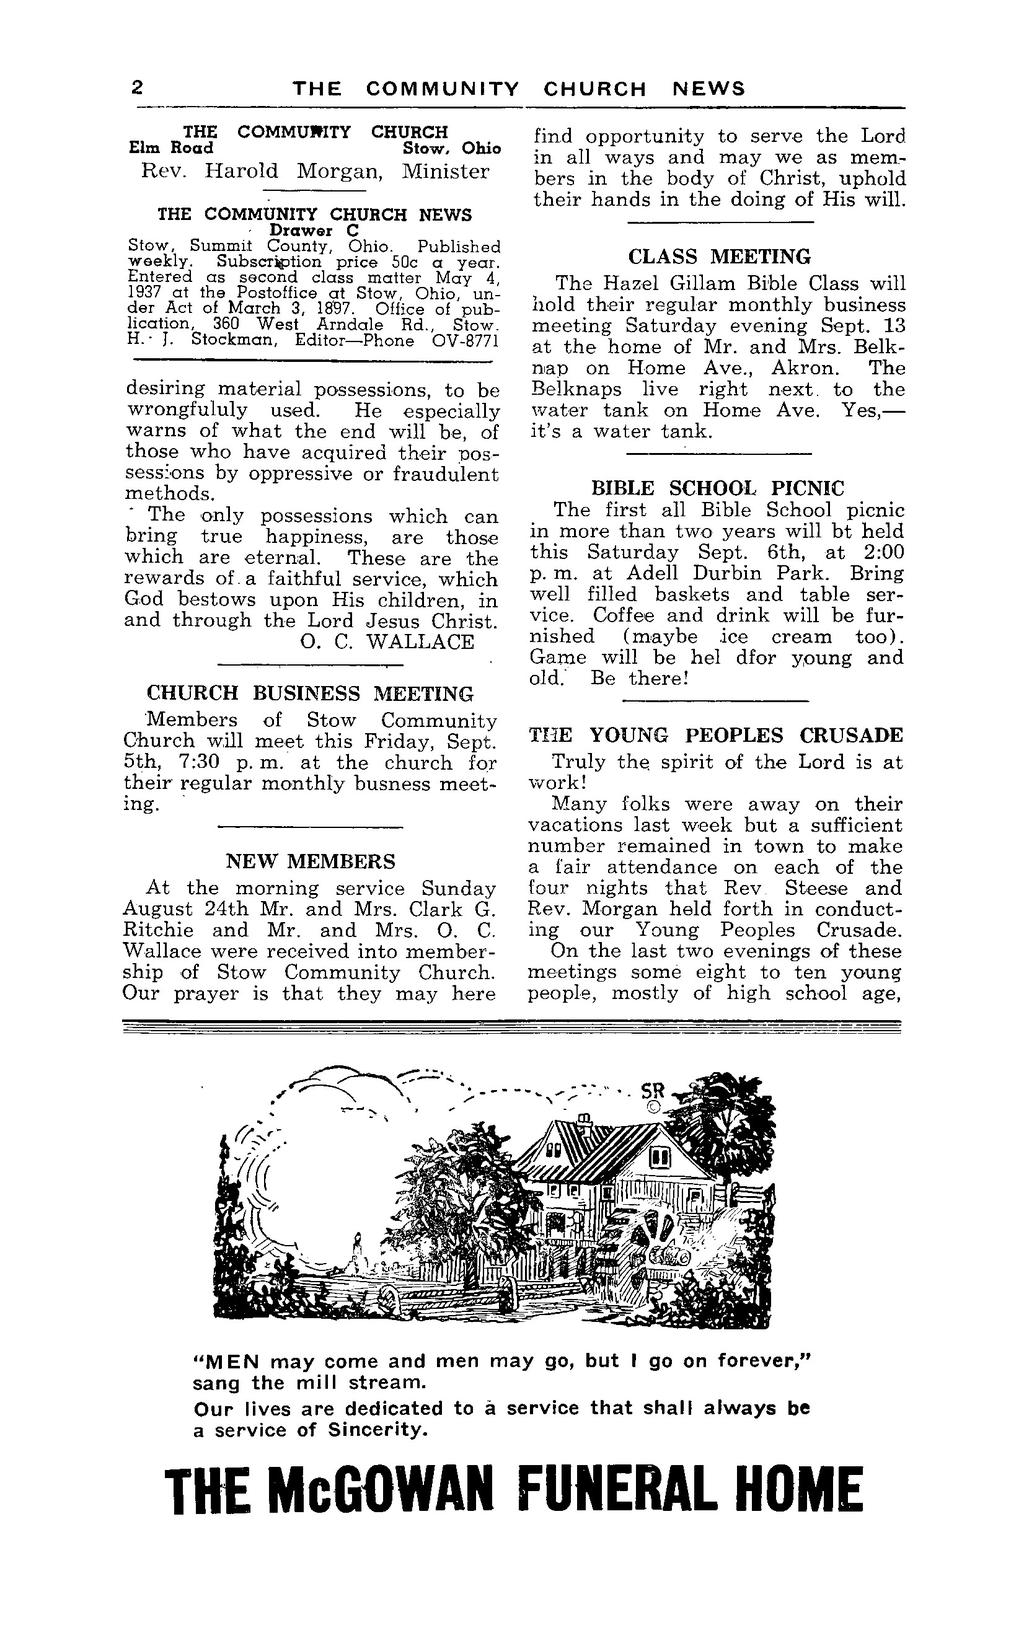 373 THE THE Elm Road COMMUMTY Rev. H a r o l d COMMUNITY CHURCH Stow. Morgan, Ohio Minister THE COMMUNITY CHURCH NEWS Drawer C Stow, Summit County, Ohio. Published weekly.